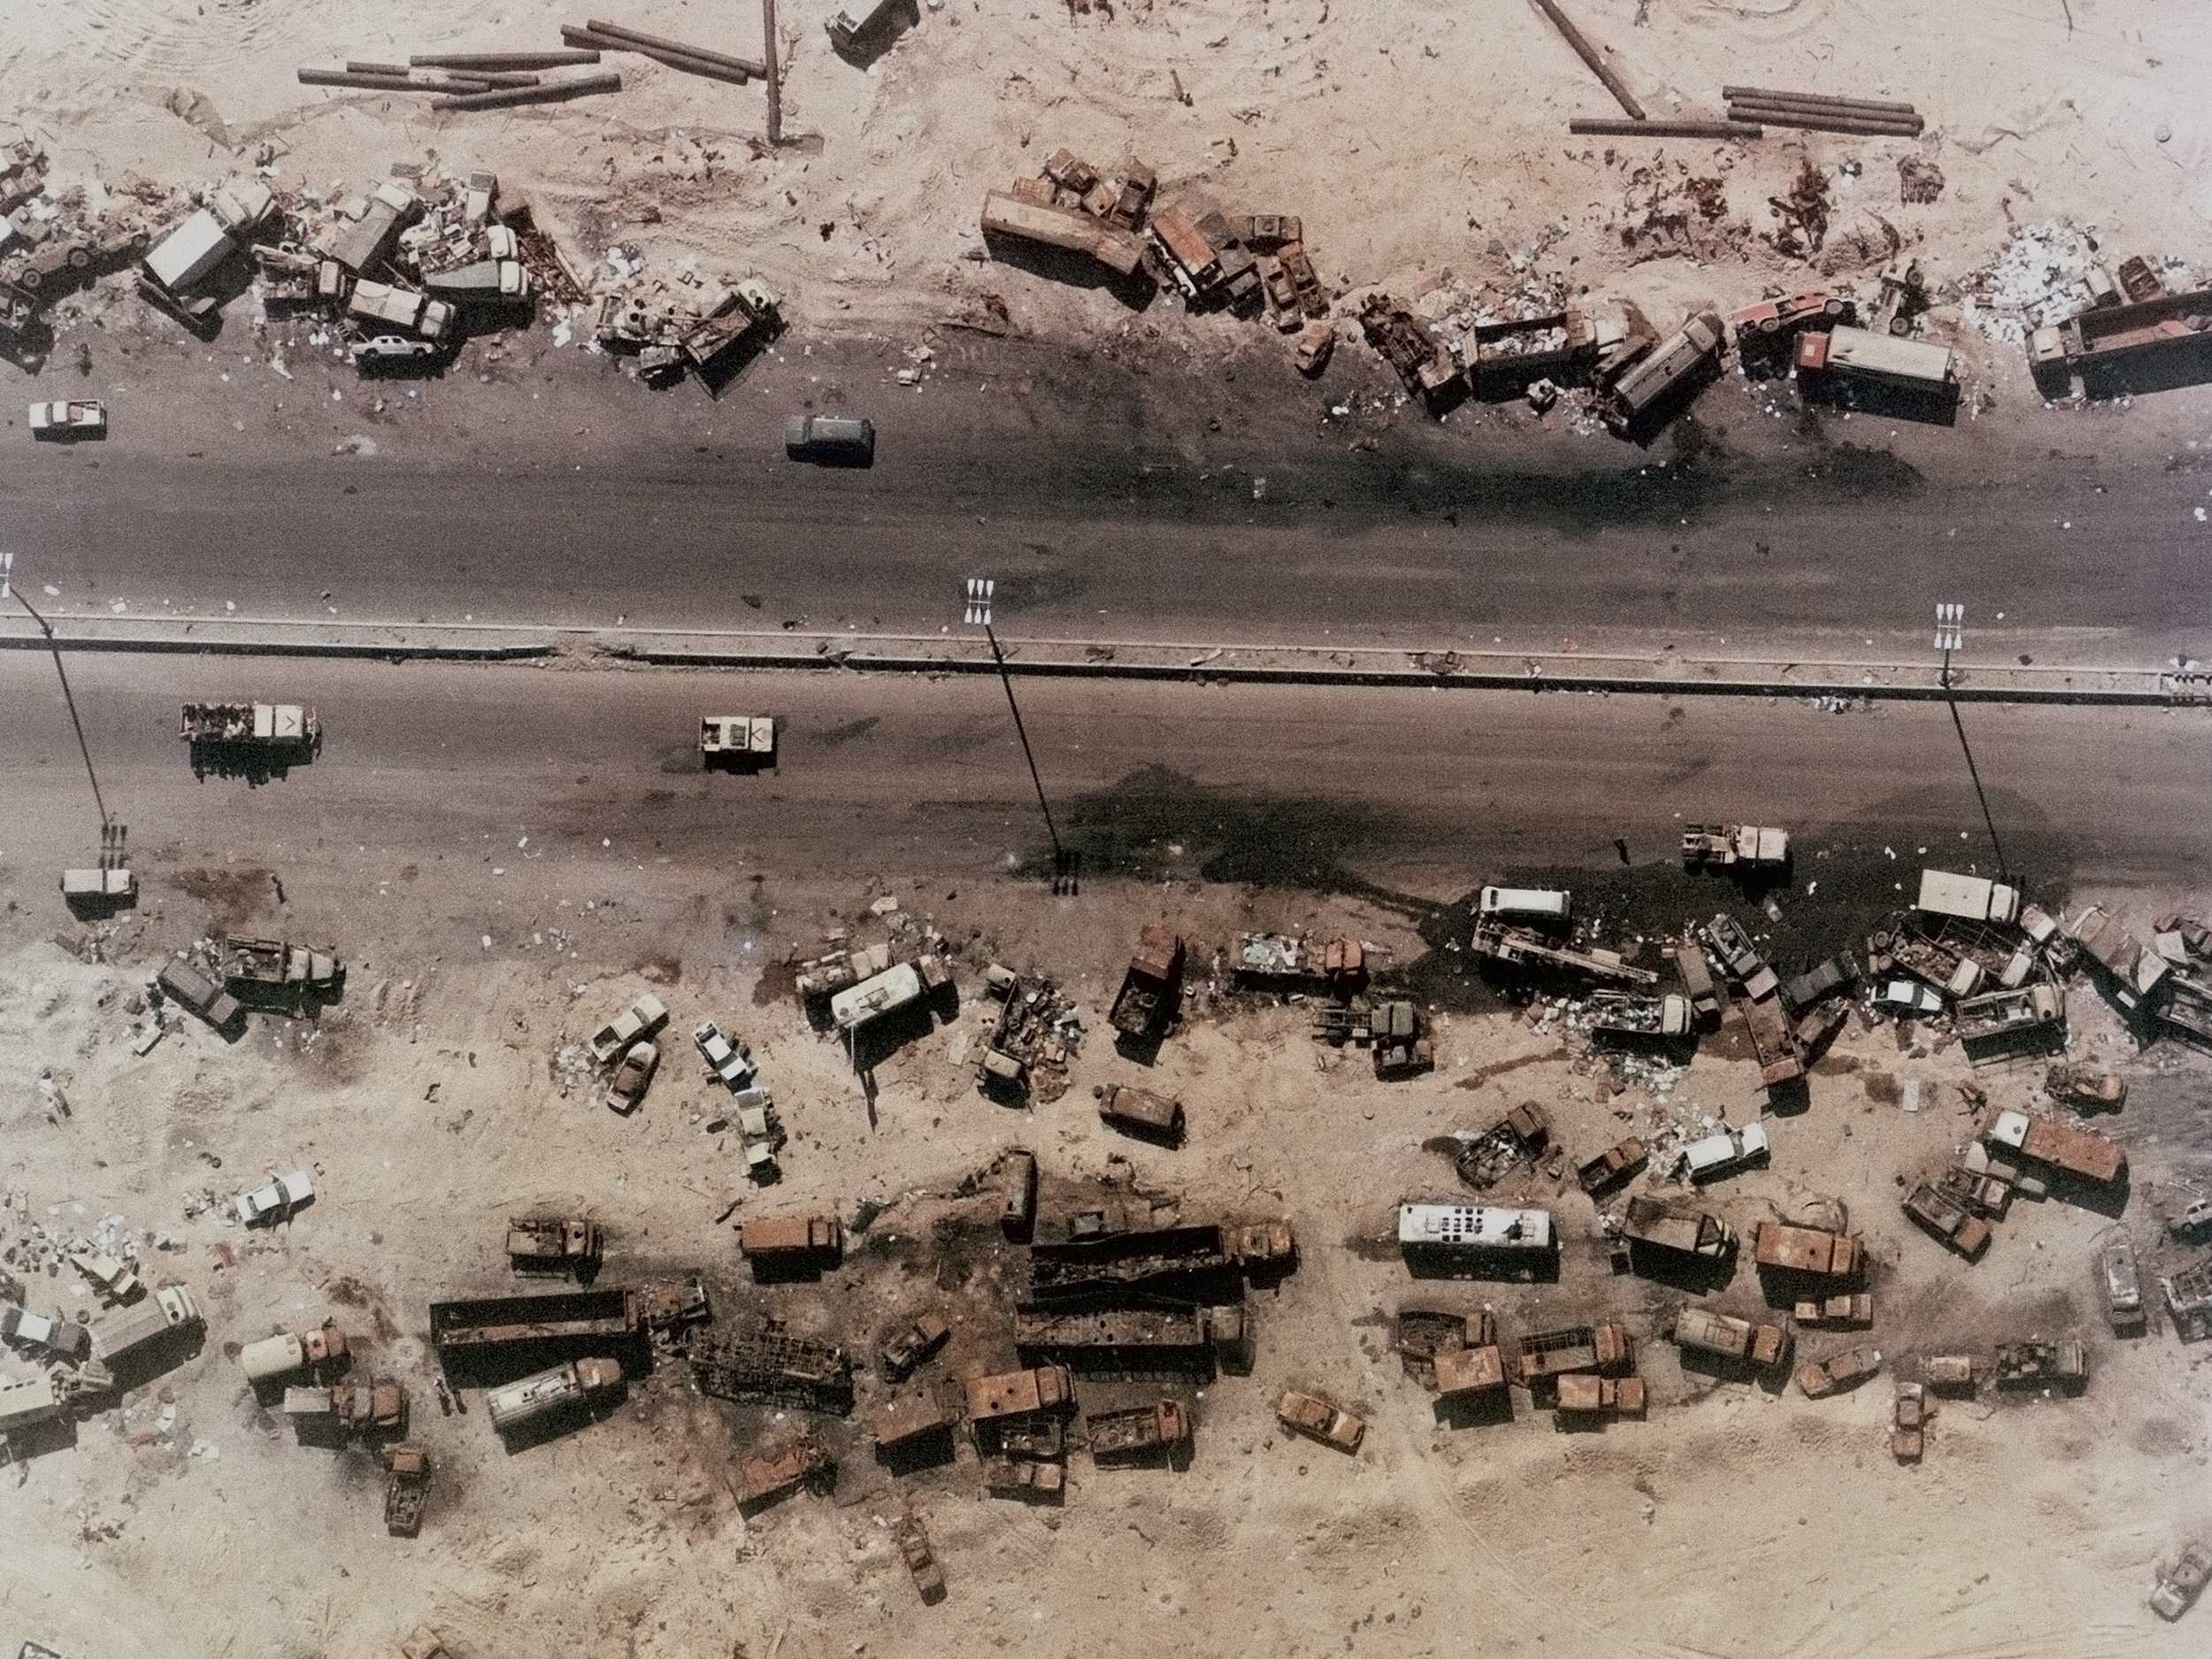 Destroyed Iraqi vehicles beside the Highway 80 west of Kuwait City